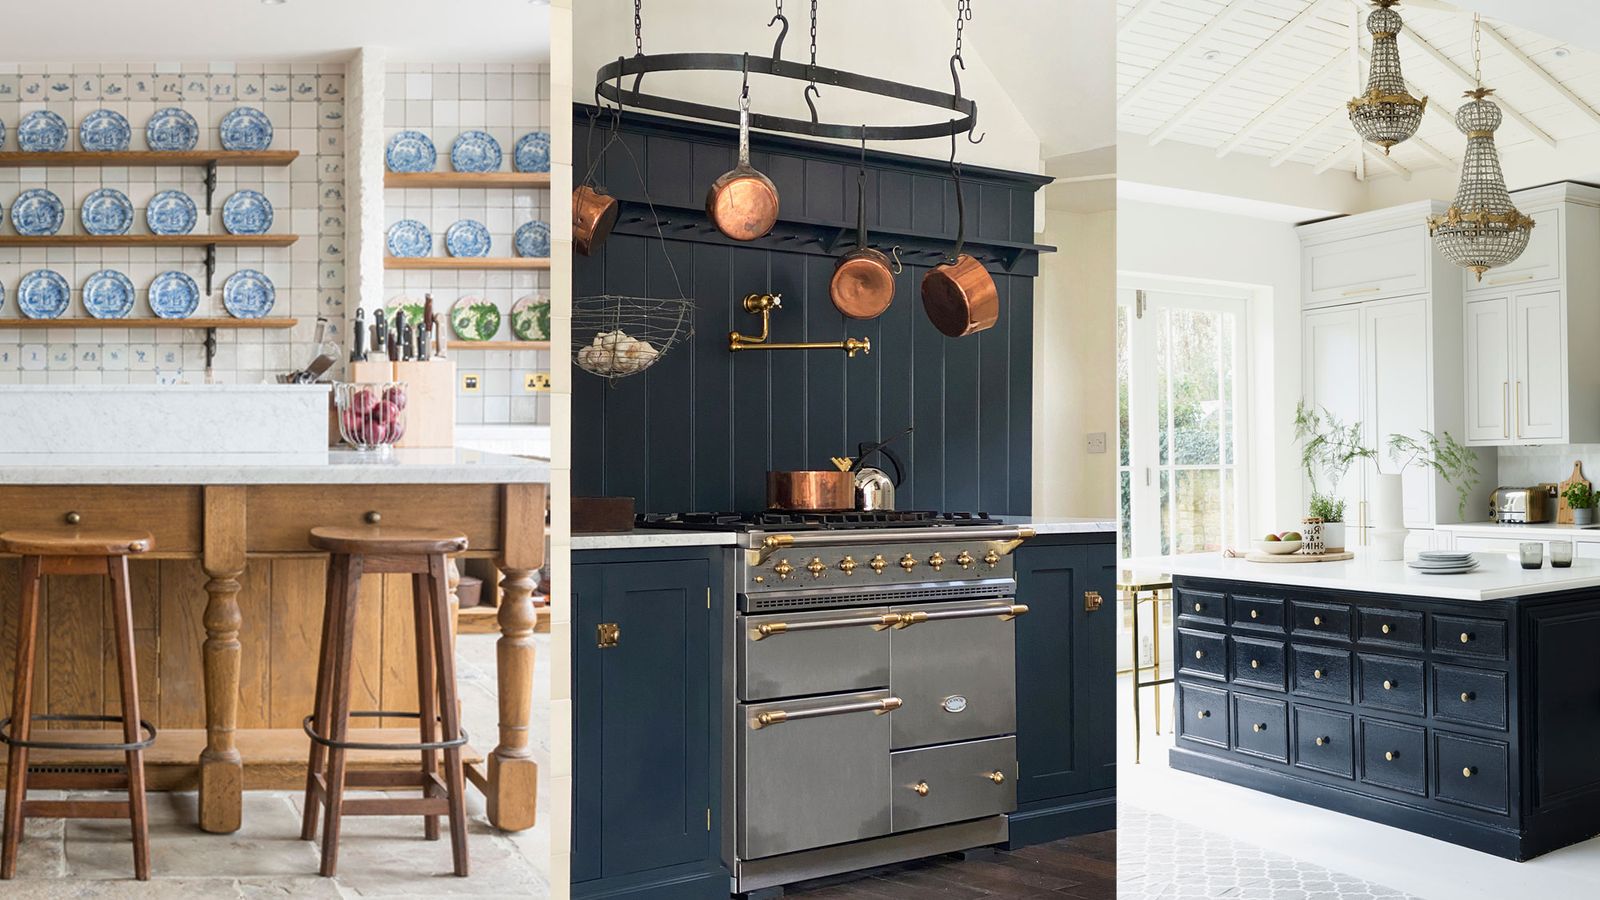 French country kitchen ideas: 50 designs with Gallic charm | Country